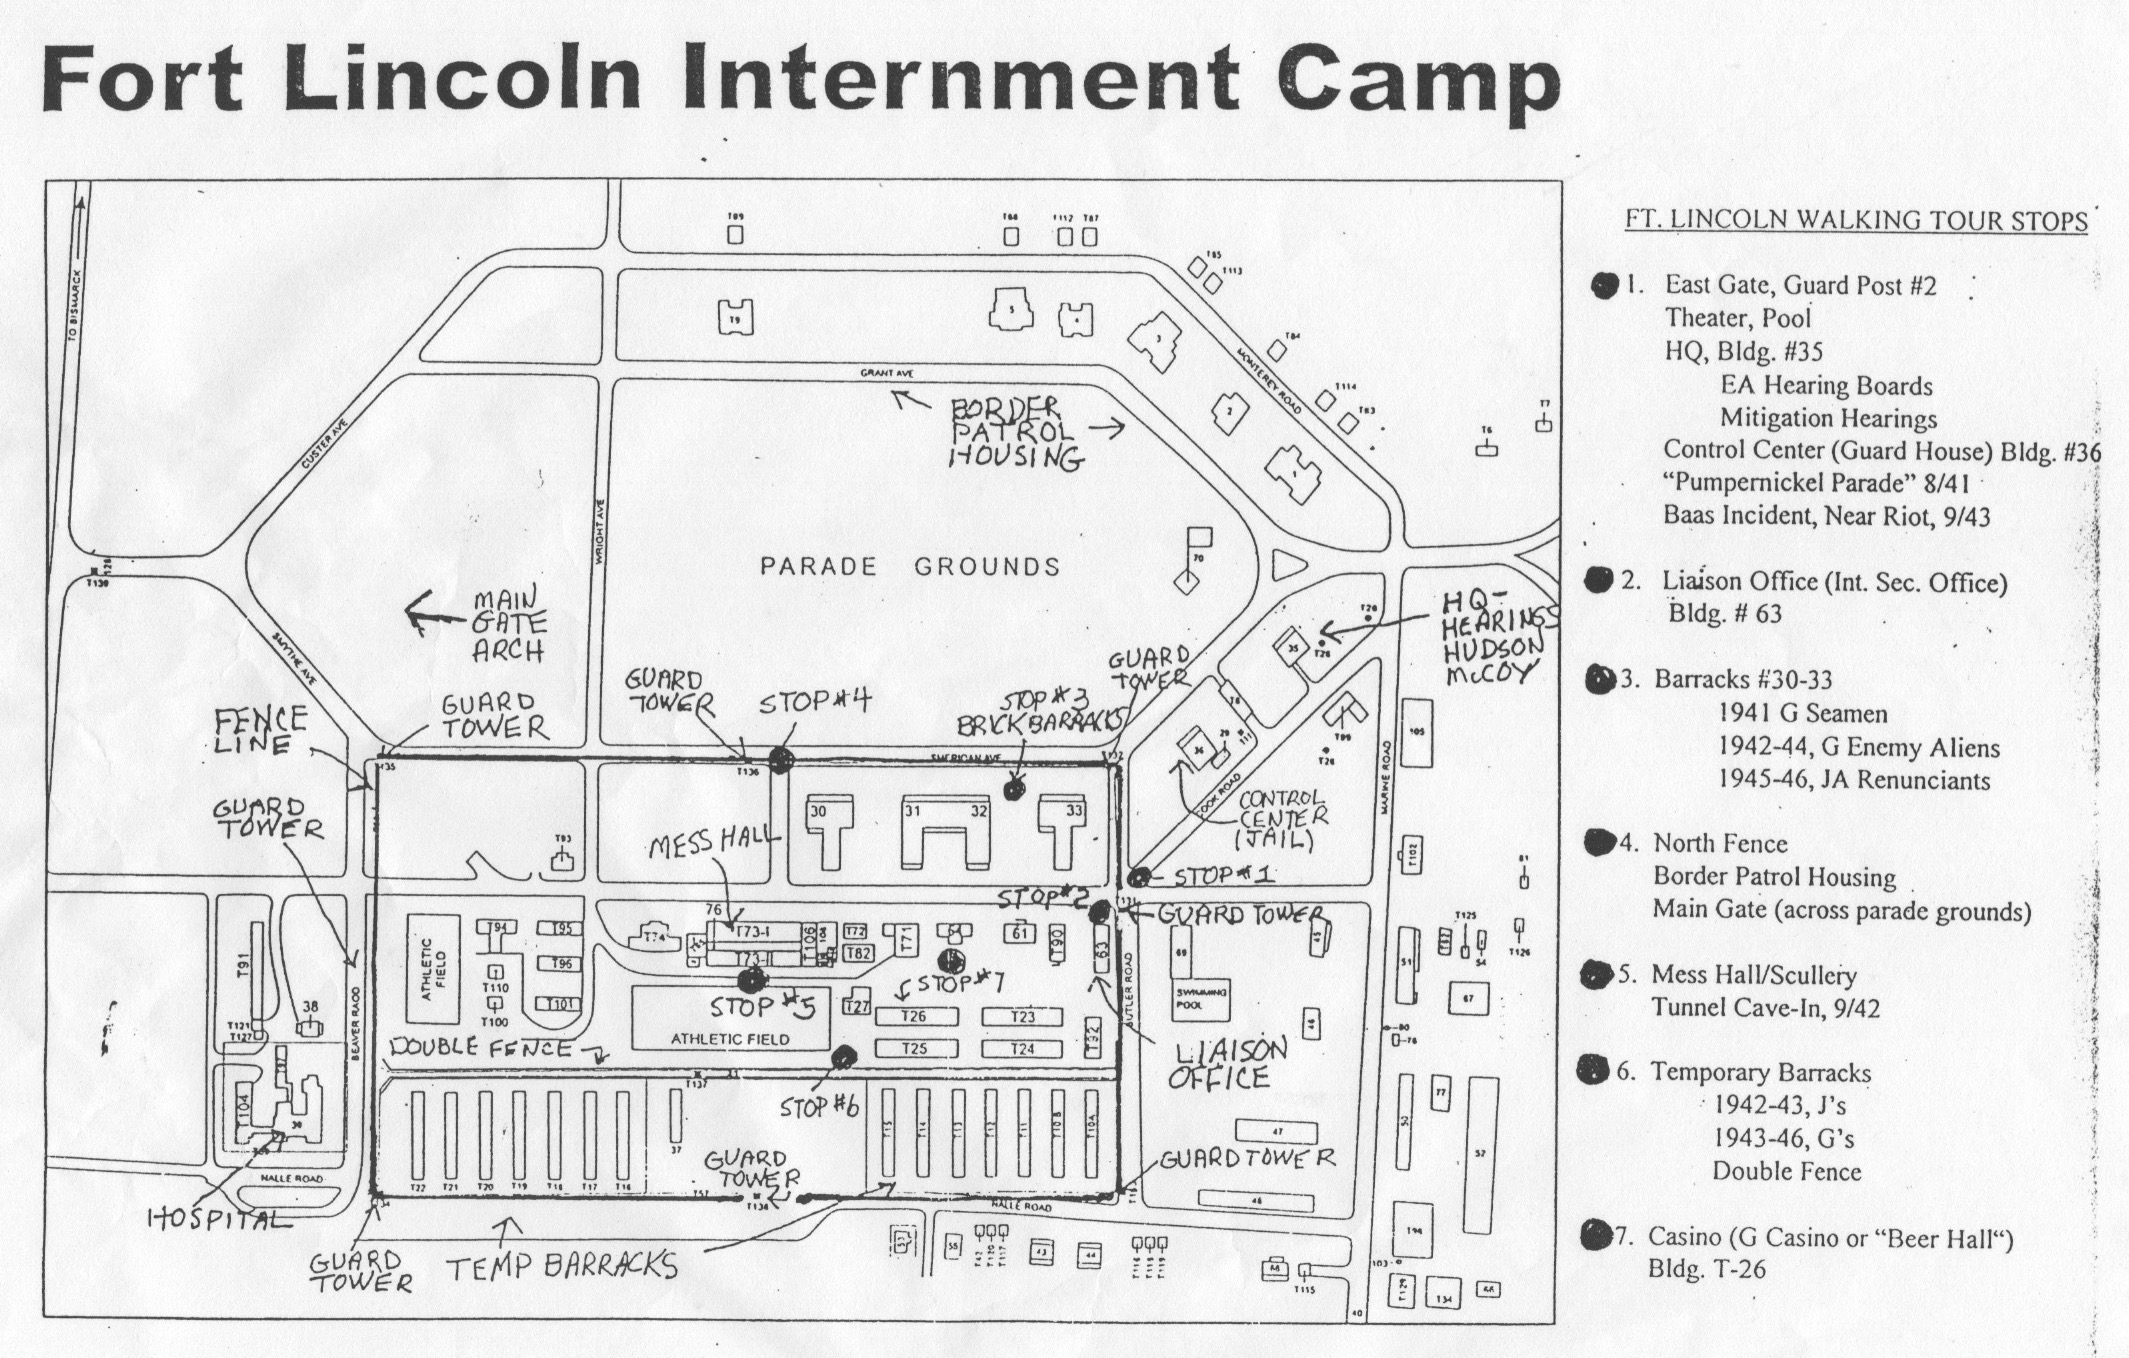 walking tour of Ft. Lincoln internment camp